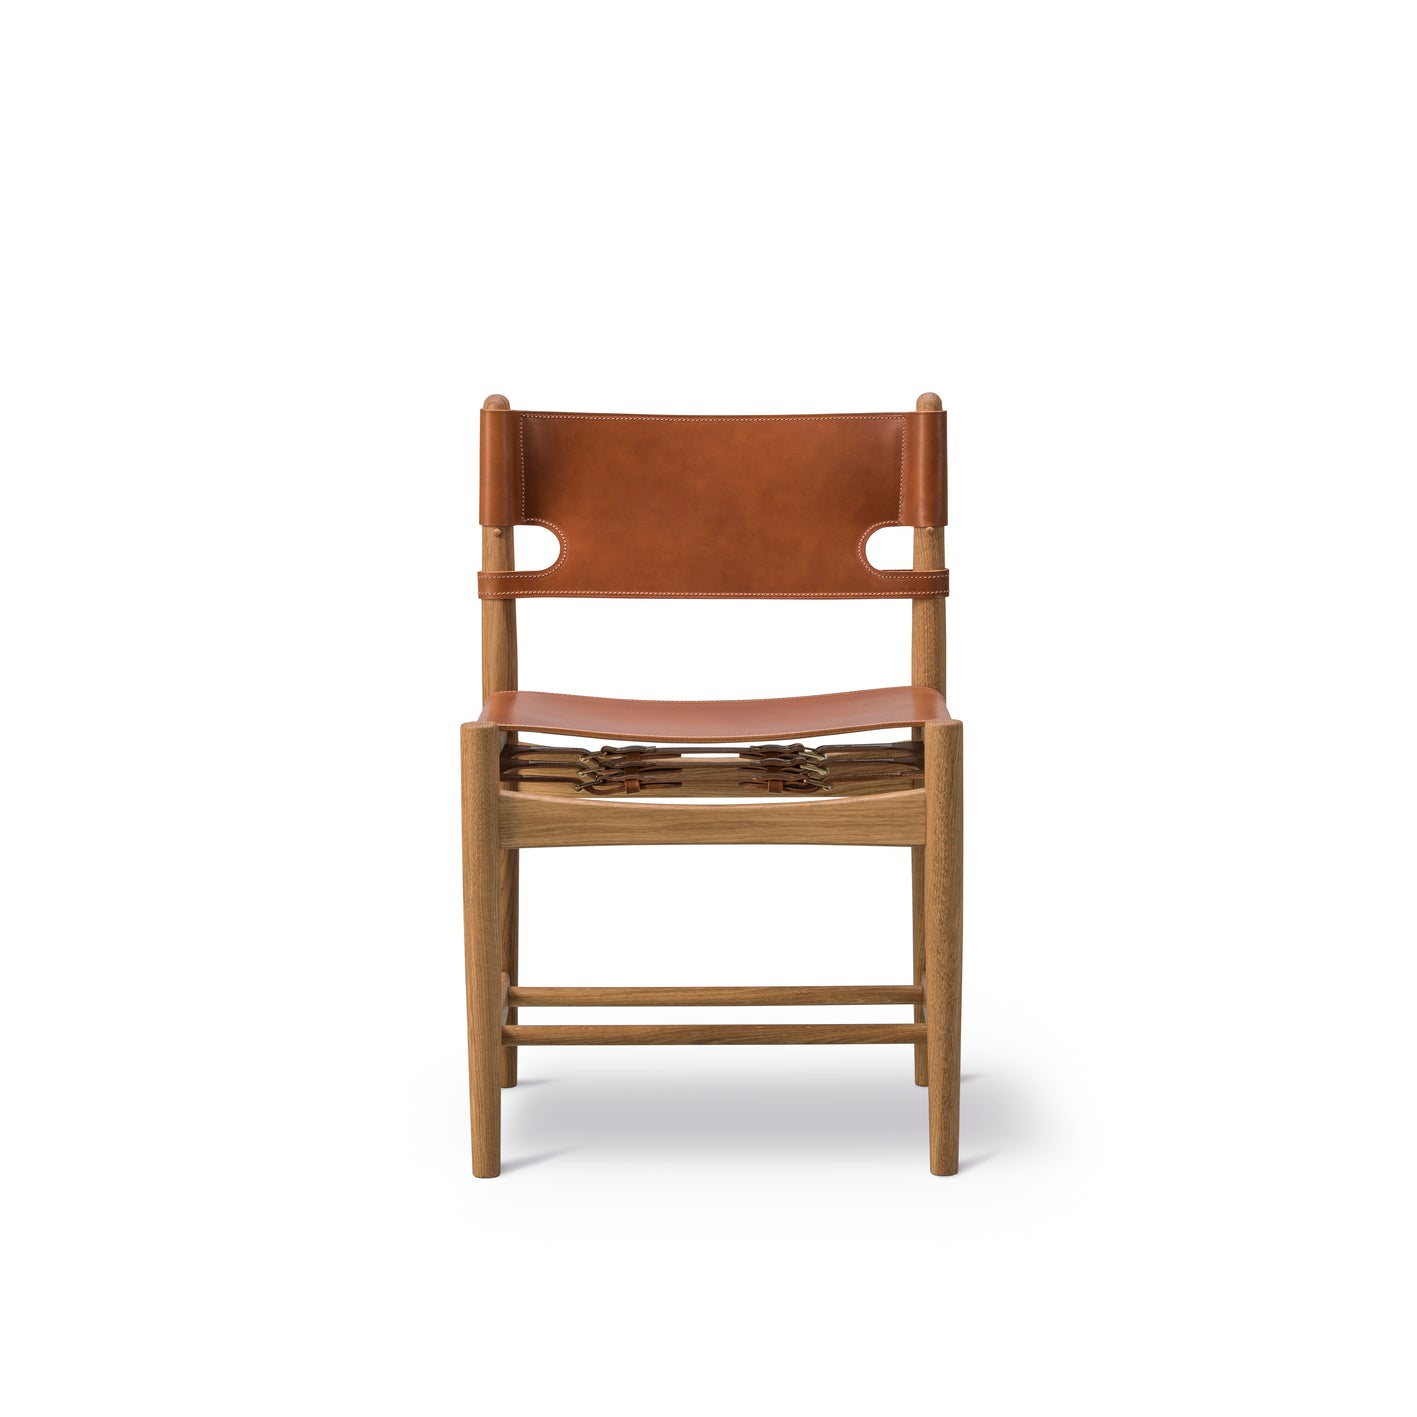 The Spanish Dining Chair